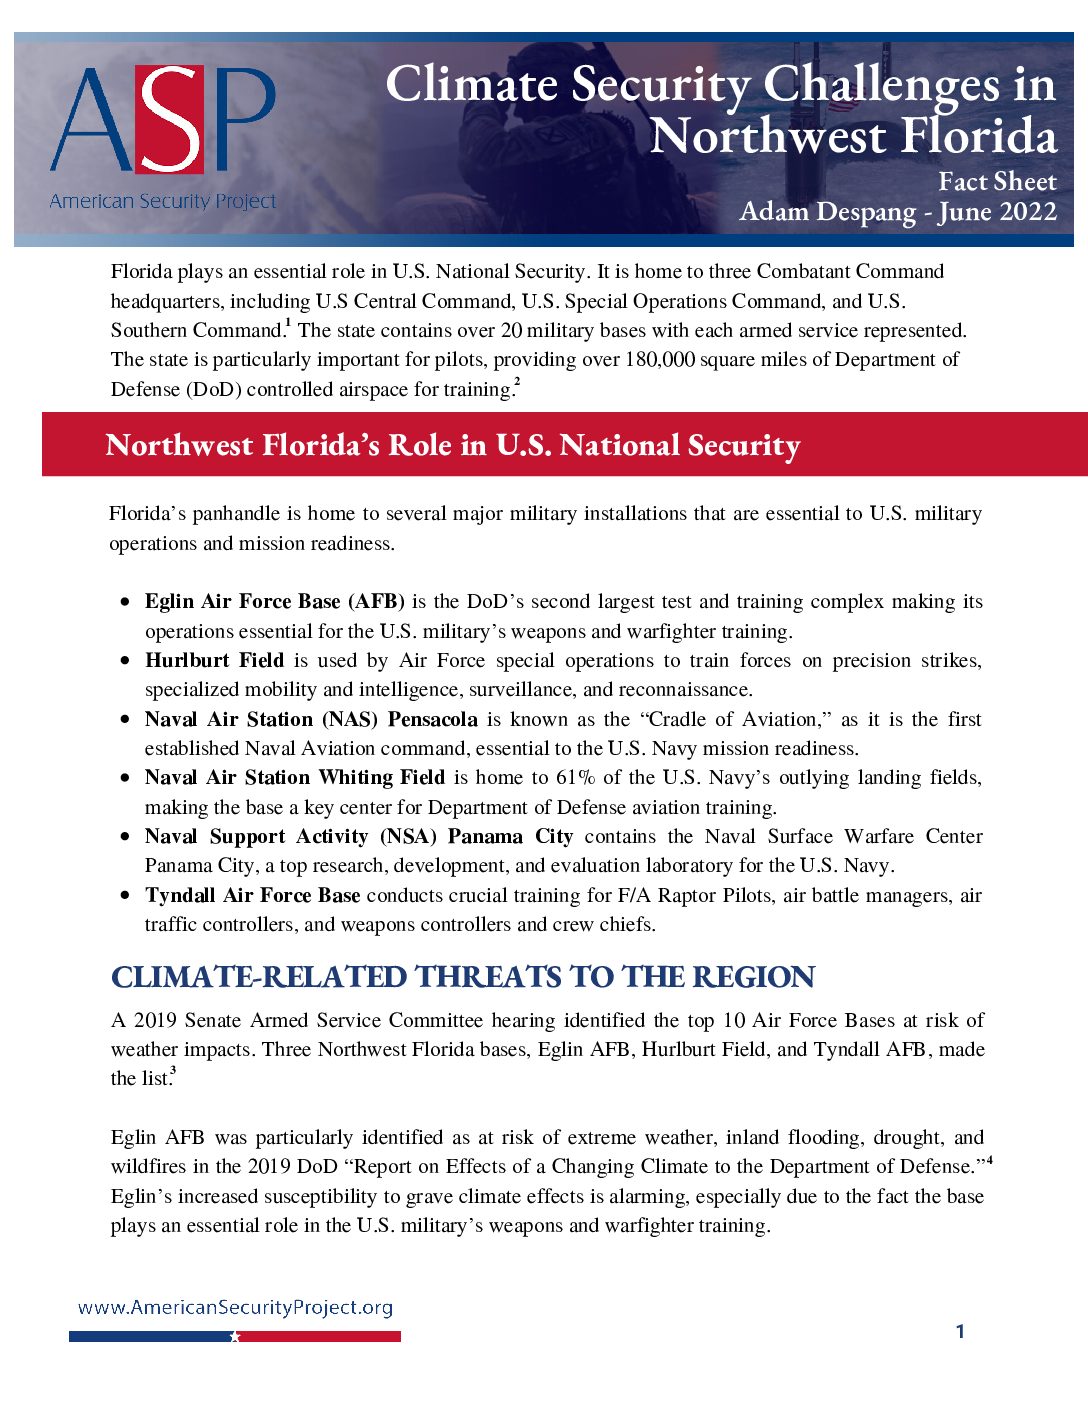 Fact Sheet – Climate Security Challenges in Northwest Florida